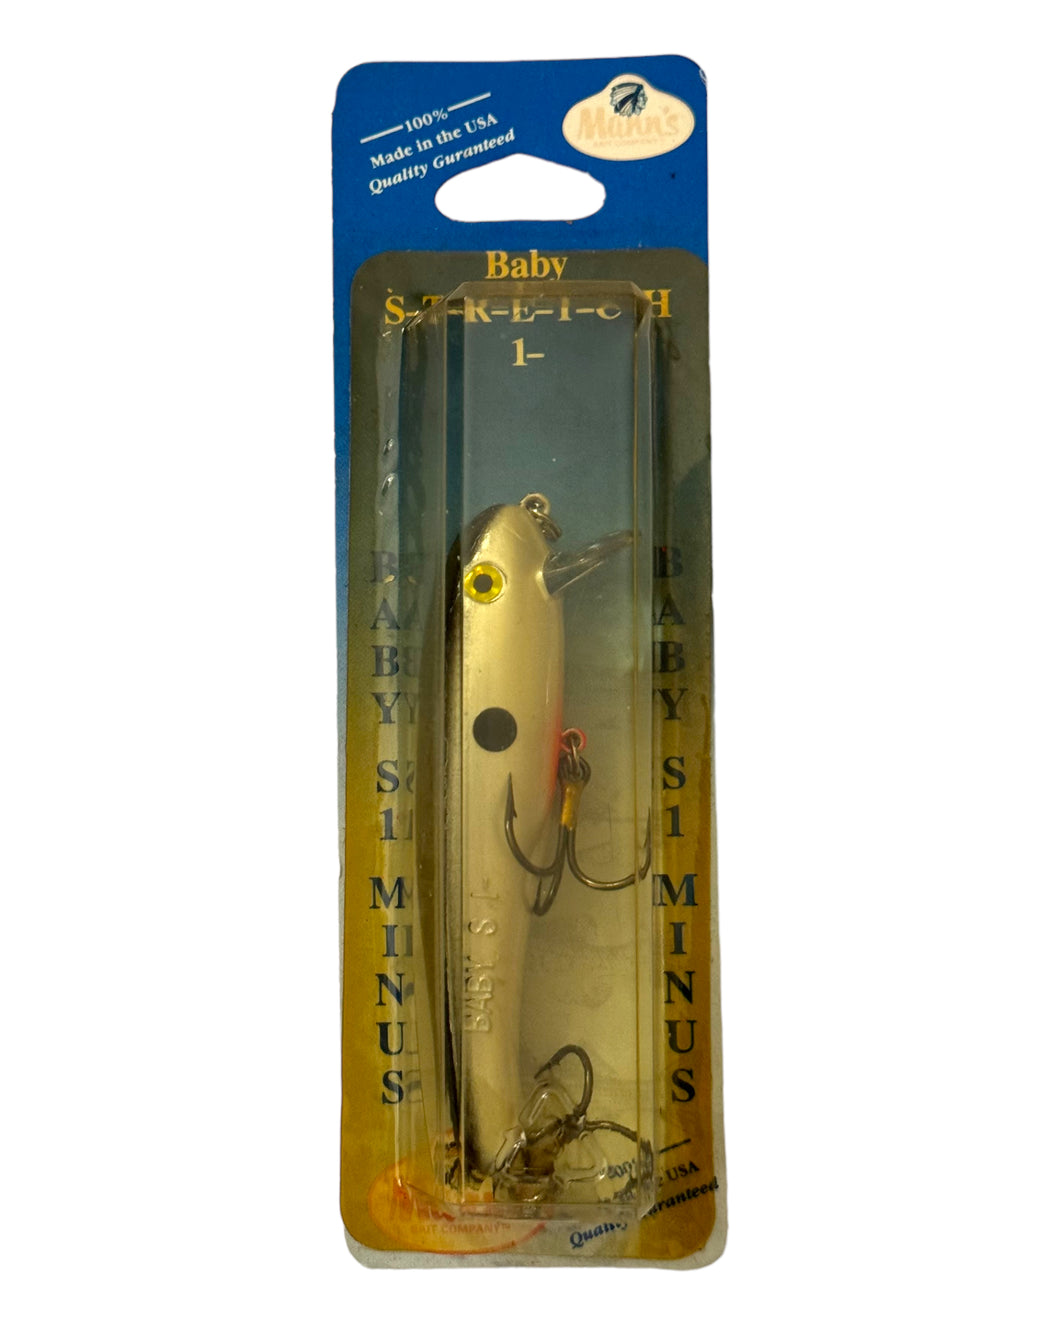 MANN'S BAIT COMPANY BABY STRETCH 1- (One Minus) Fishing Lure in PEARL BLACK BACK